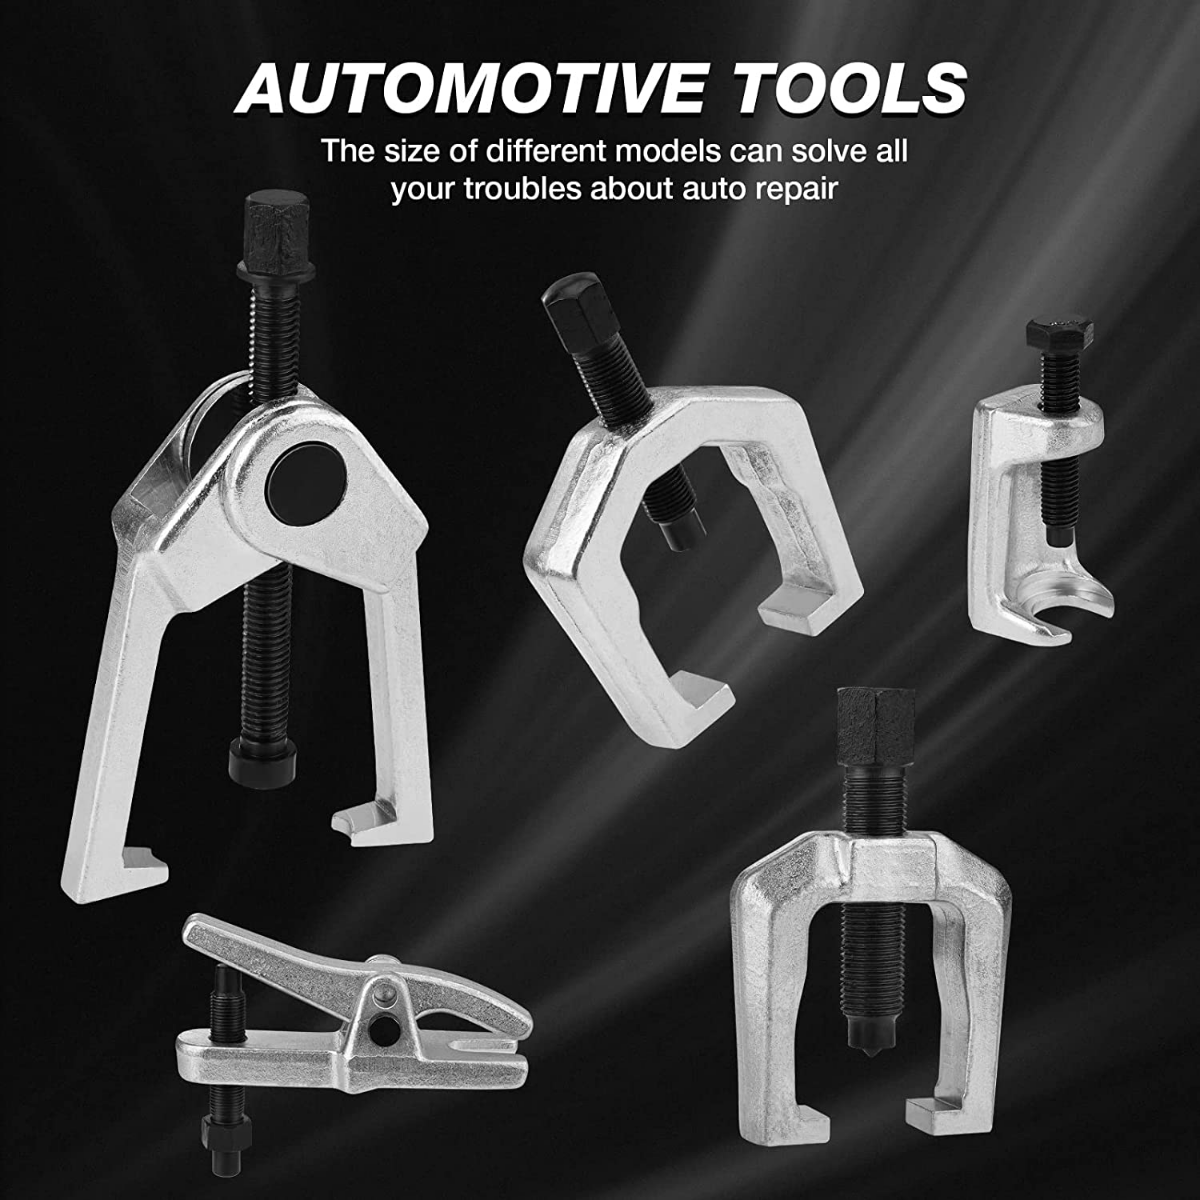 DURATECH 5-Piece Ball Joint Separator, Pitman Arm Puller, Tie Rod End Tool Set